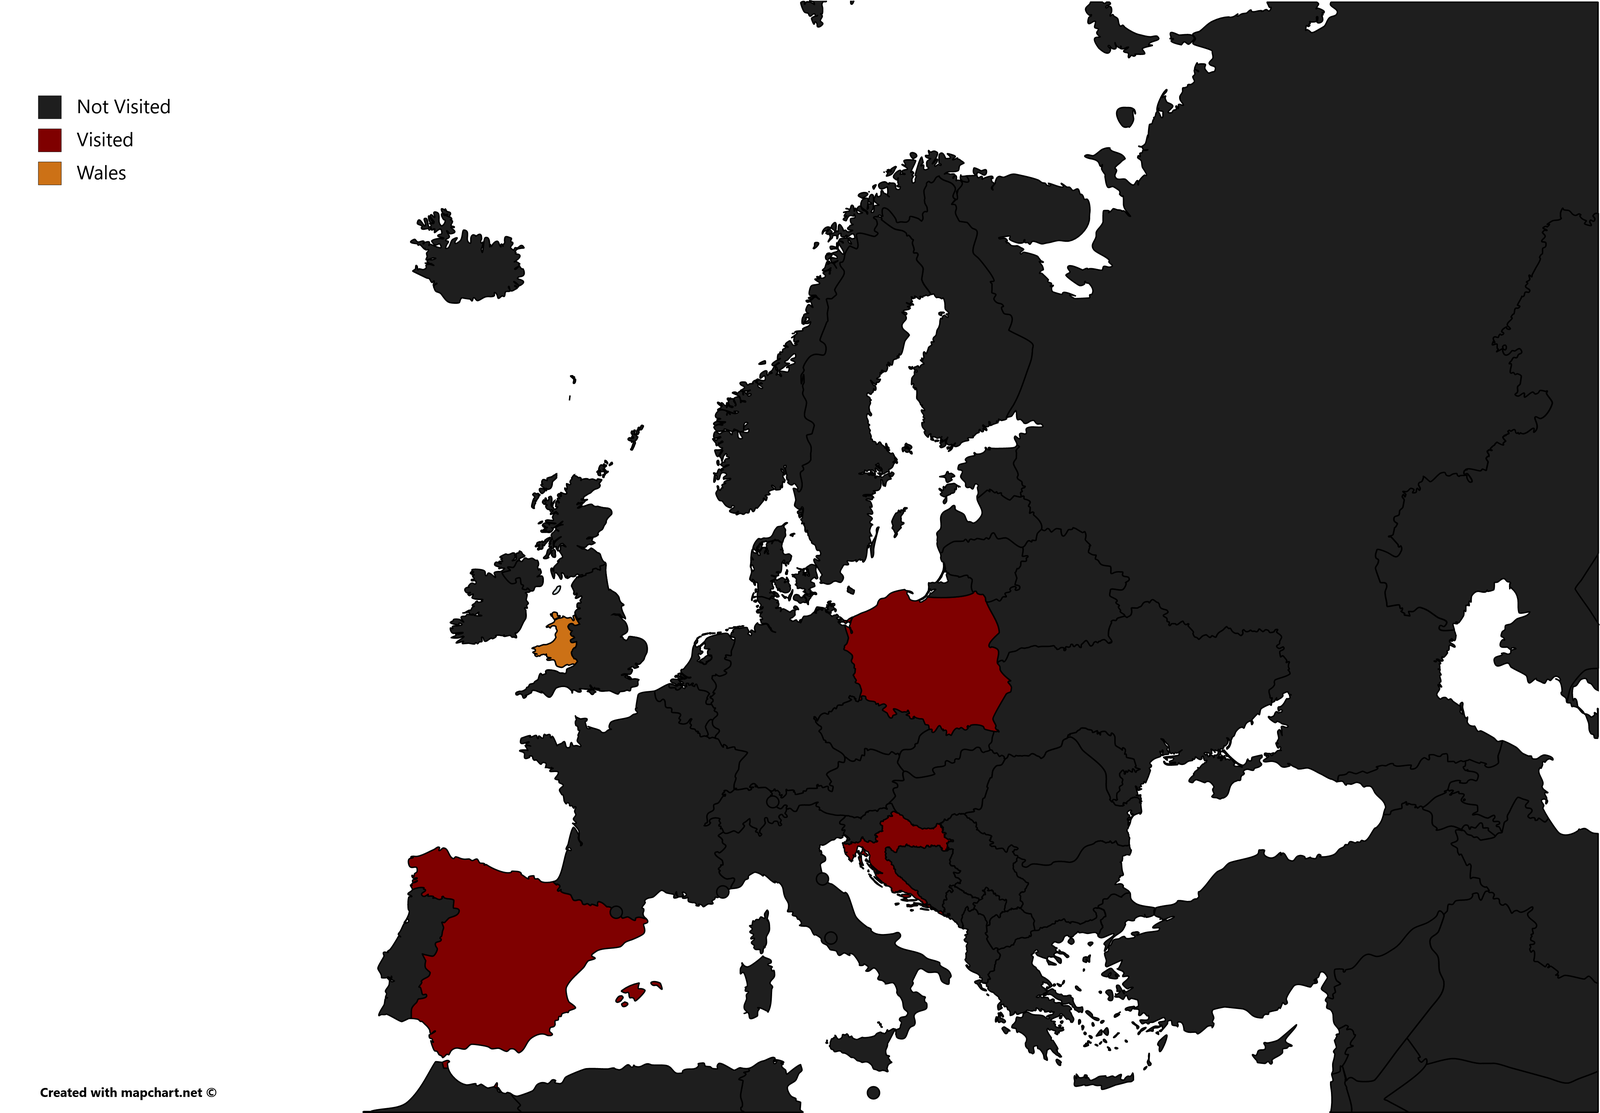 Wales highlighted on the map of Europe